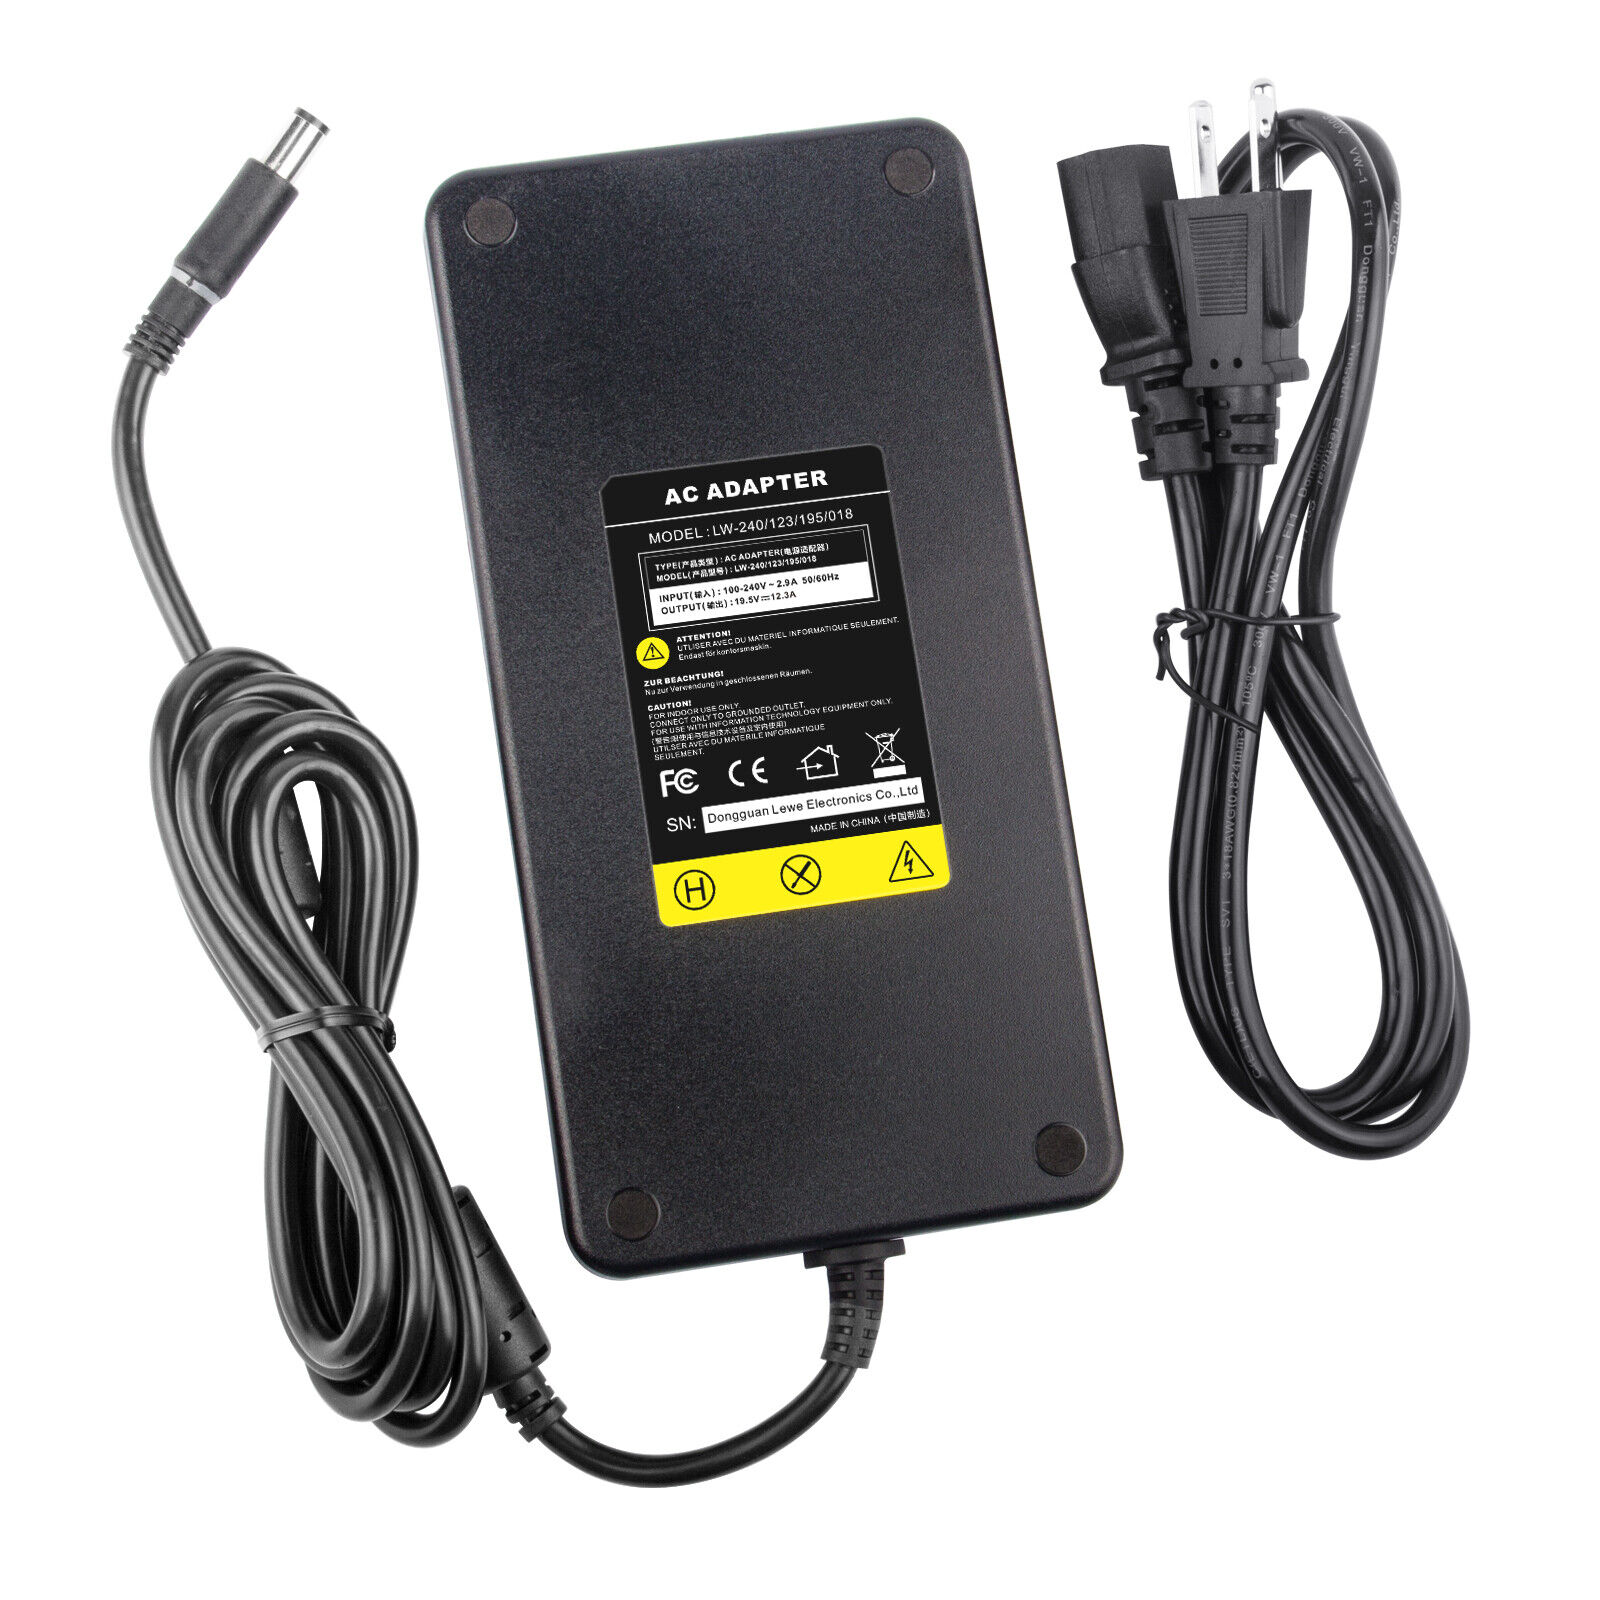 230W Ac Adapter Charger Power Cord for Dell Precision M4600 M4700 M4800 Laptops